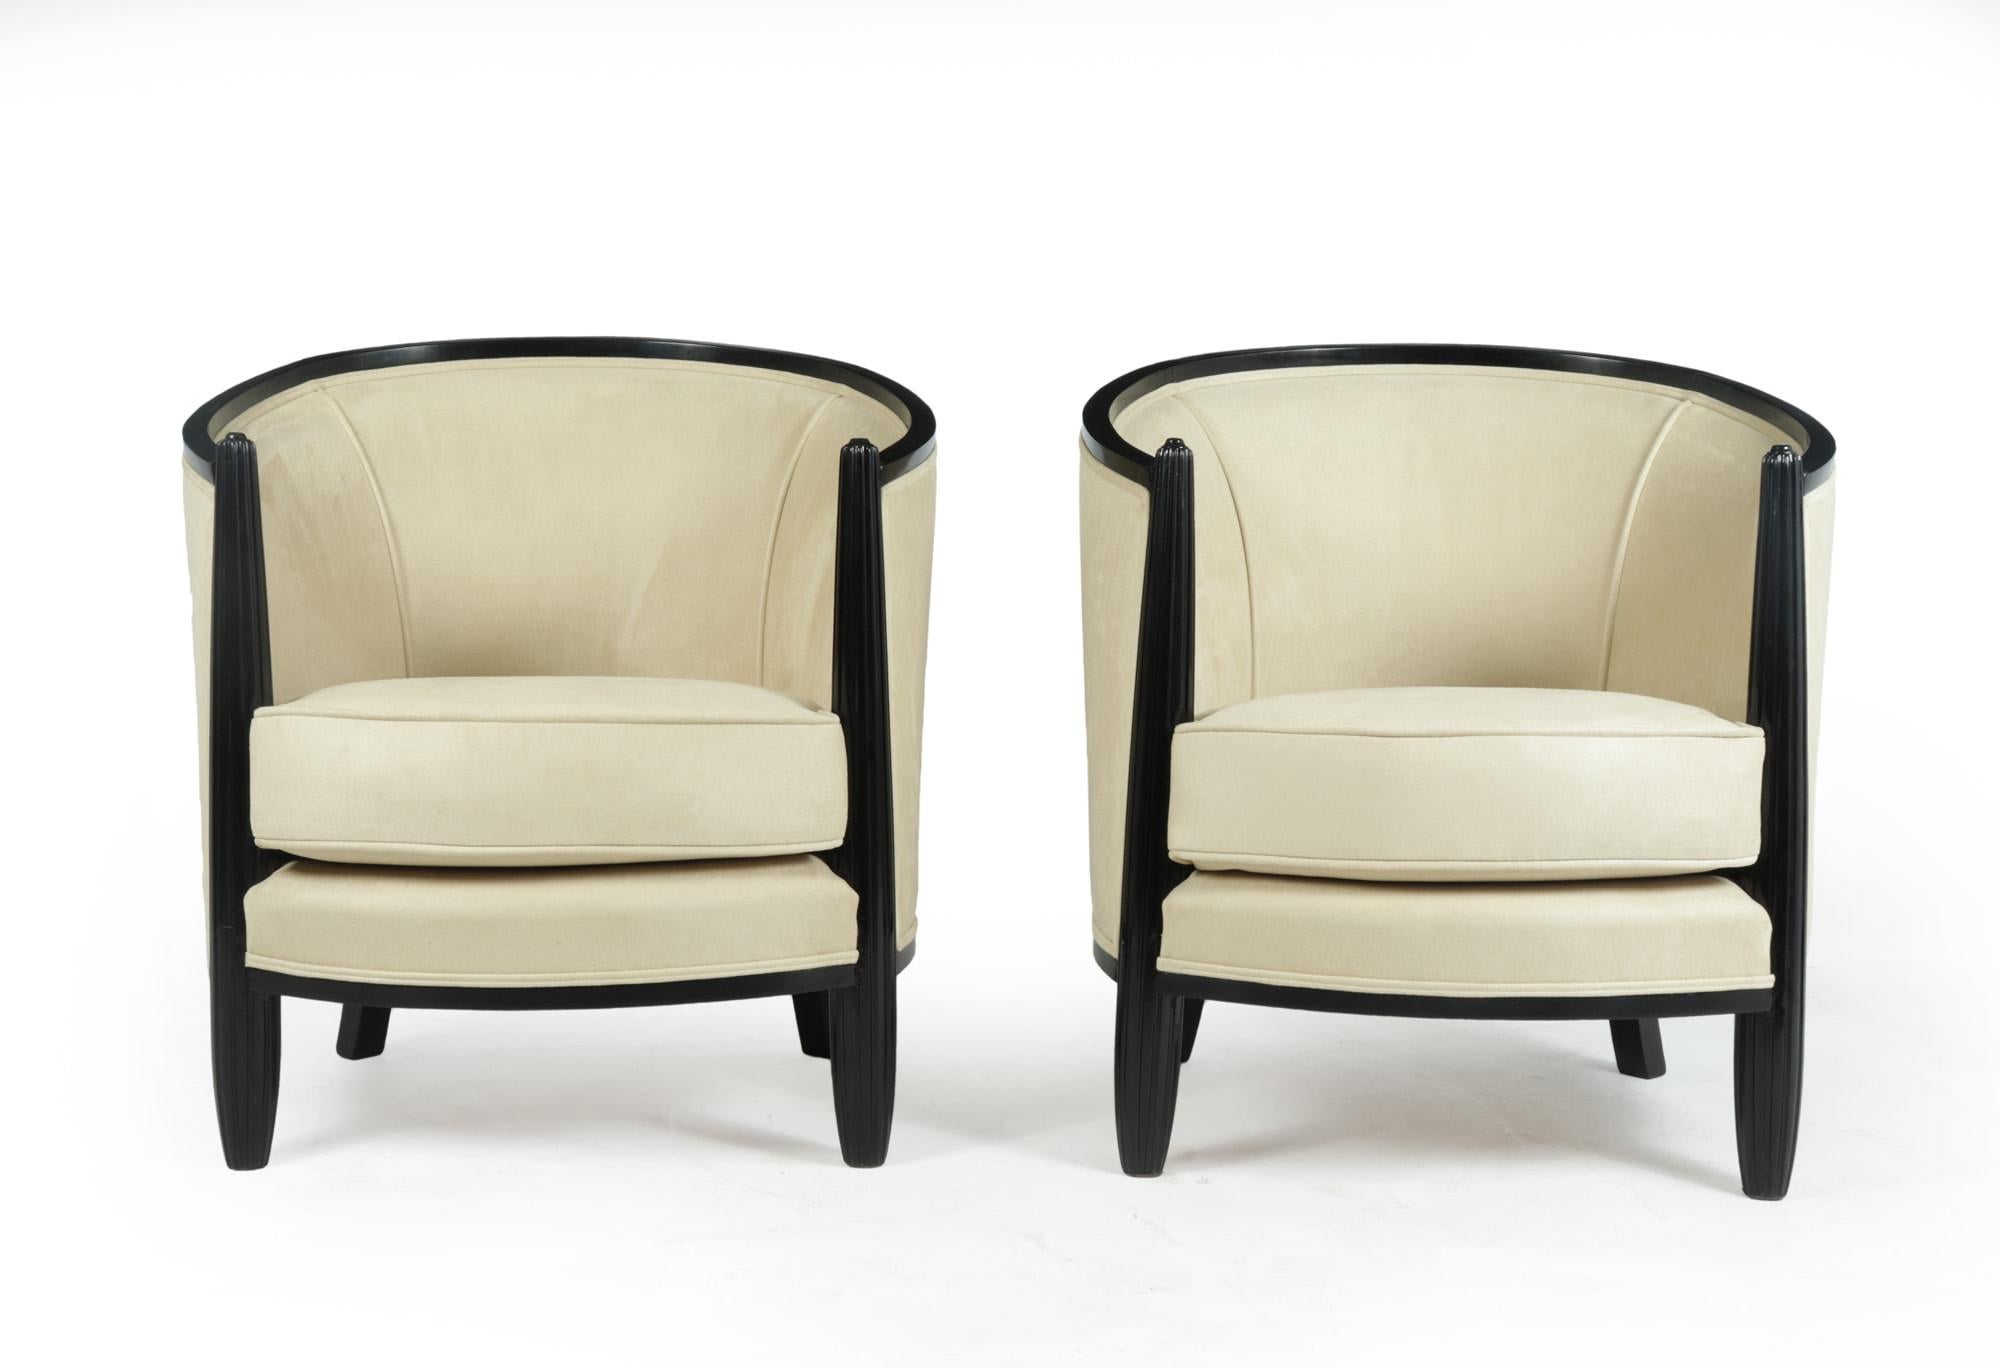 A pair of armchairs with fluted front uprights and curved backrests with in ebonised hardwood, the chairs were hand made in France in the 1920’s, we have stripped them glued the frames fully polished the wood, then had them fully upholstered and